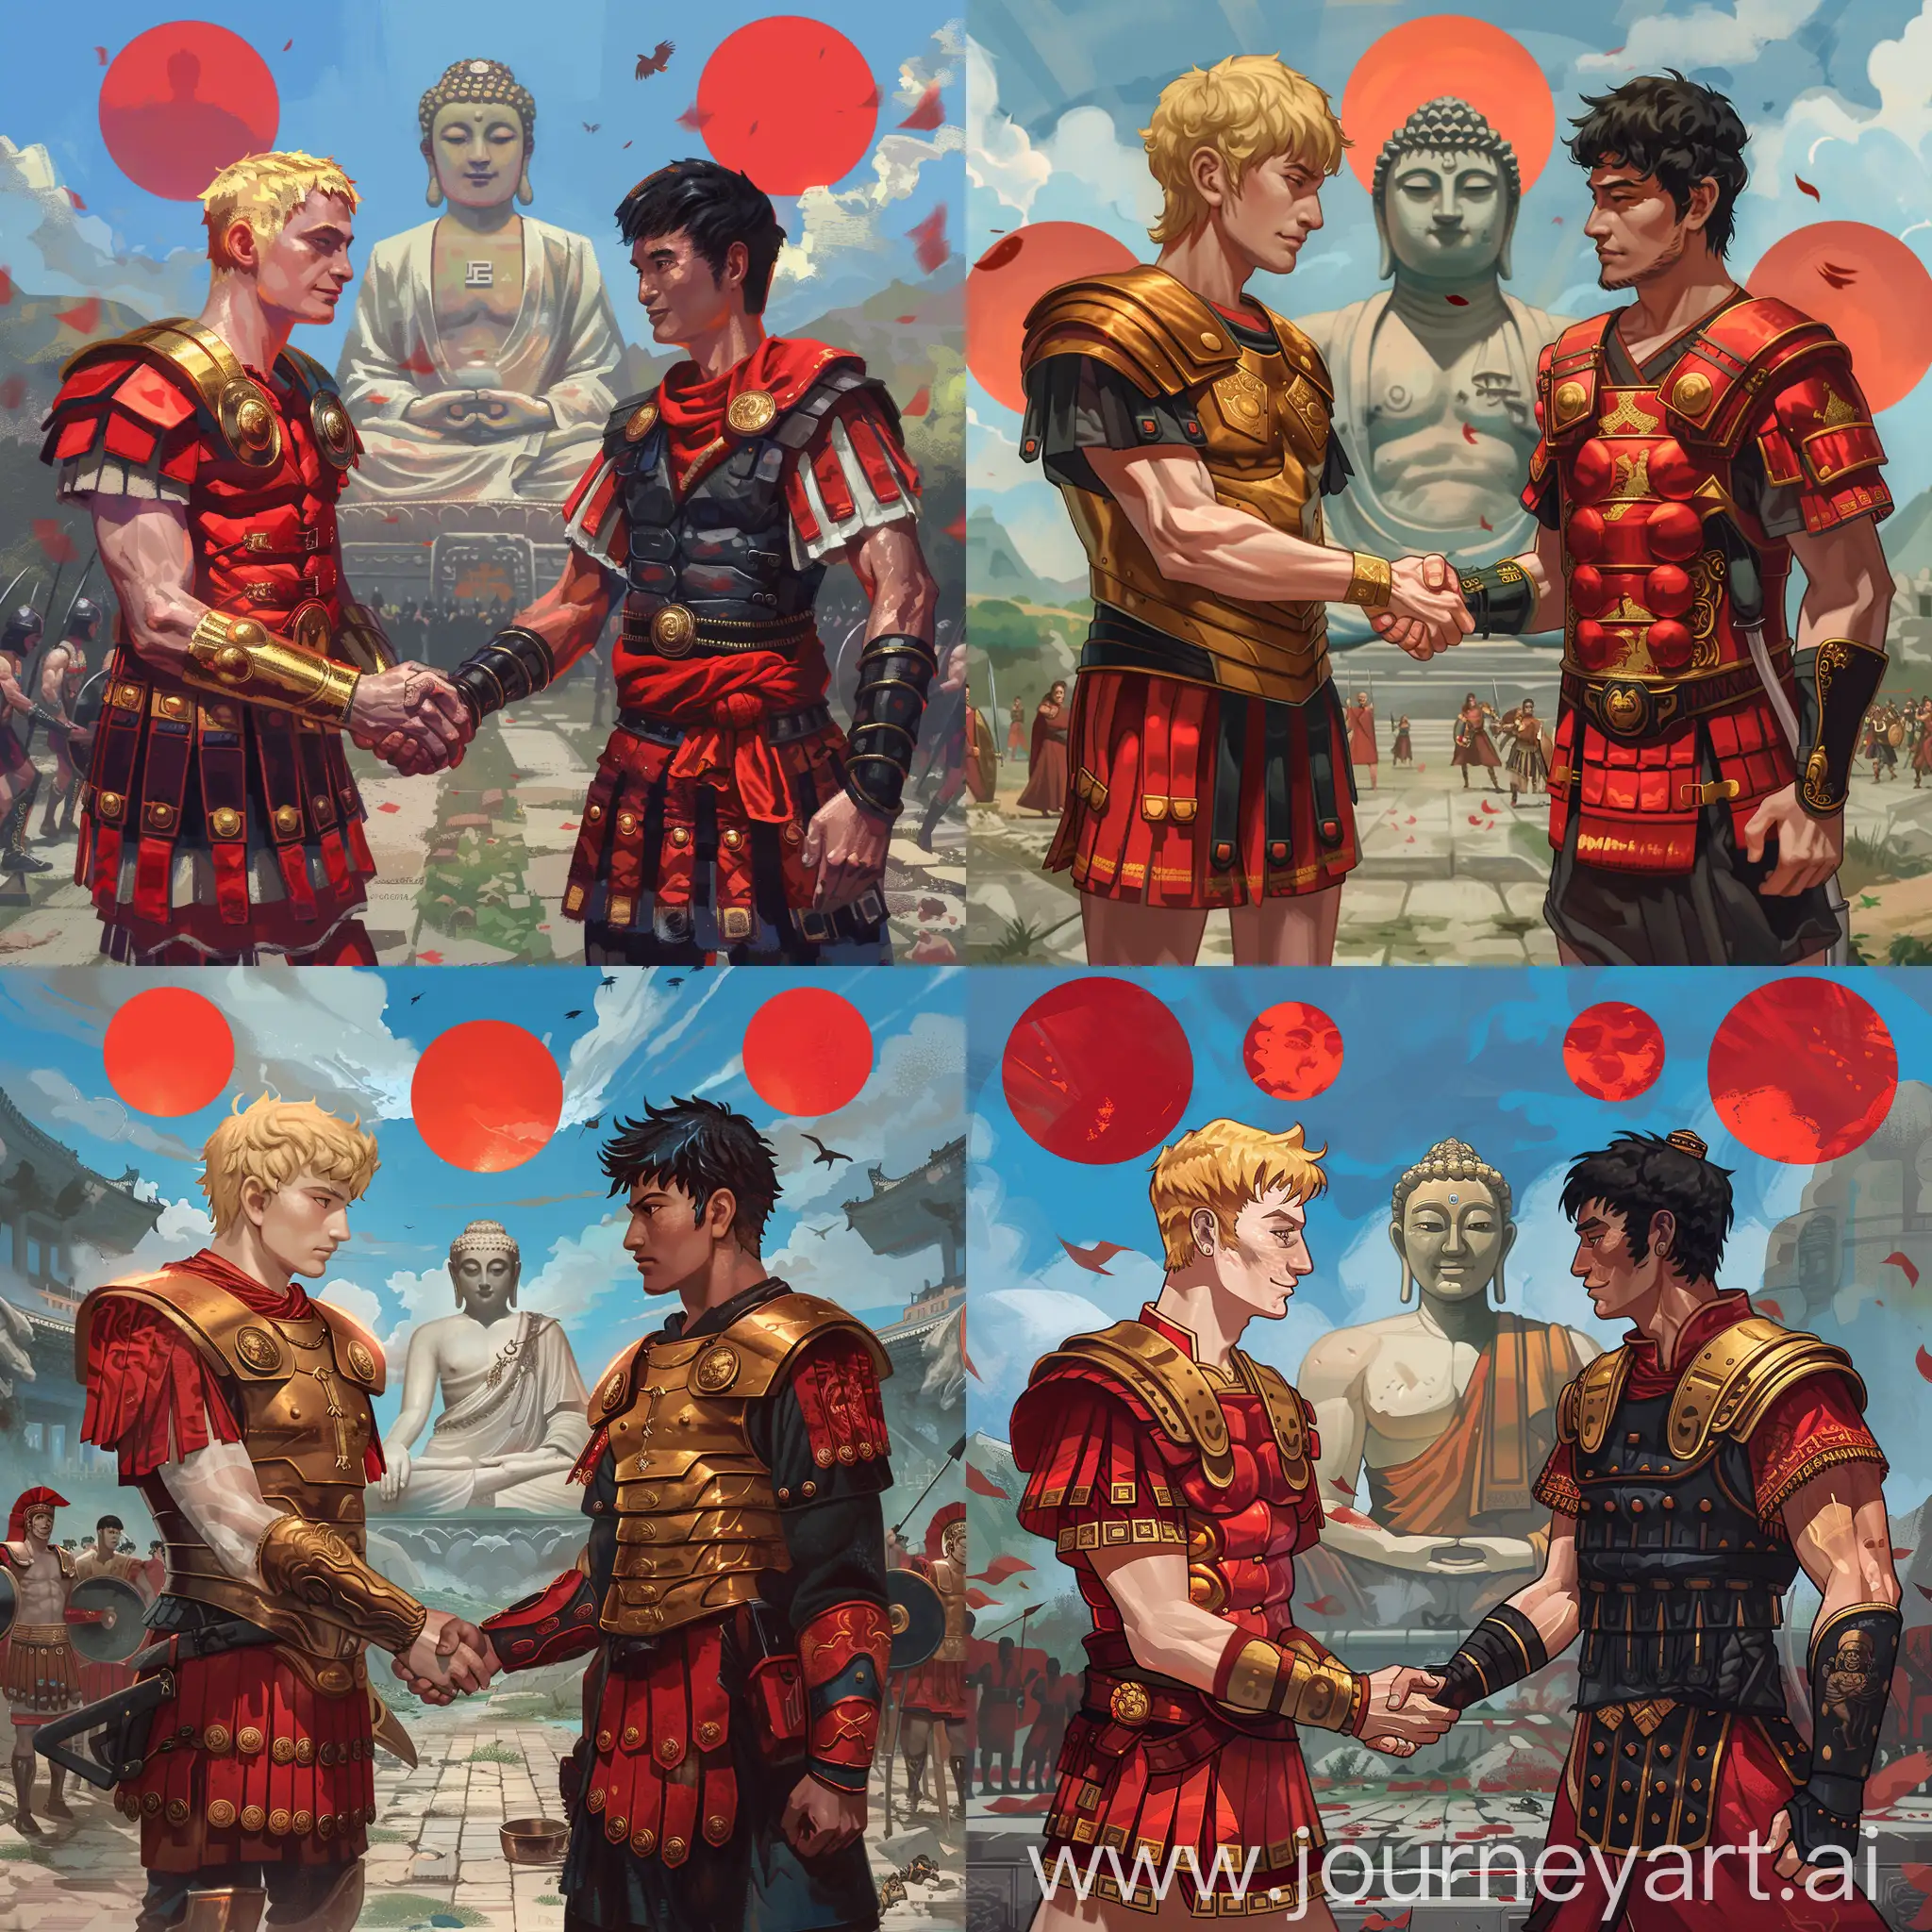 at left, a young handsome blond Roman general with red-golden Roman legionary armor, no helmet.

at right, a young handsome  black-haired Chinese Han Dynasty warrior, with red-black color Han Dynasty warrior armor, no helmet.

they are both elegant and shaking hands under a friendly ambiance.

the background is a battlefield in ancient Central Asia, with a giant Greek style Buddha statue behind.

three red sun in blue sky.